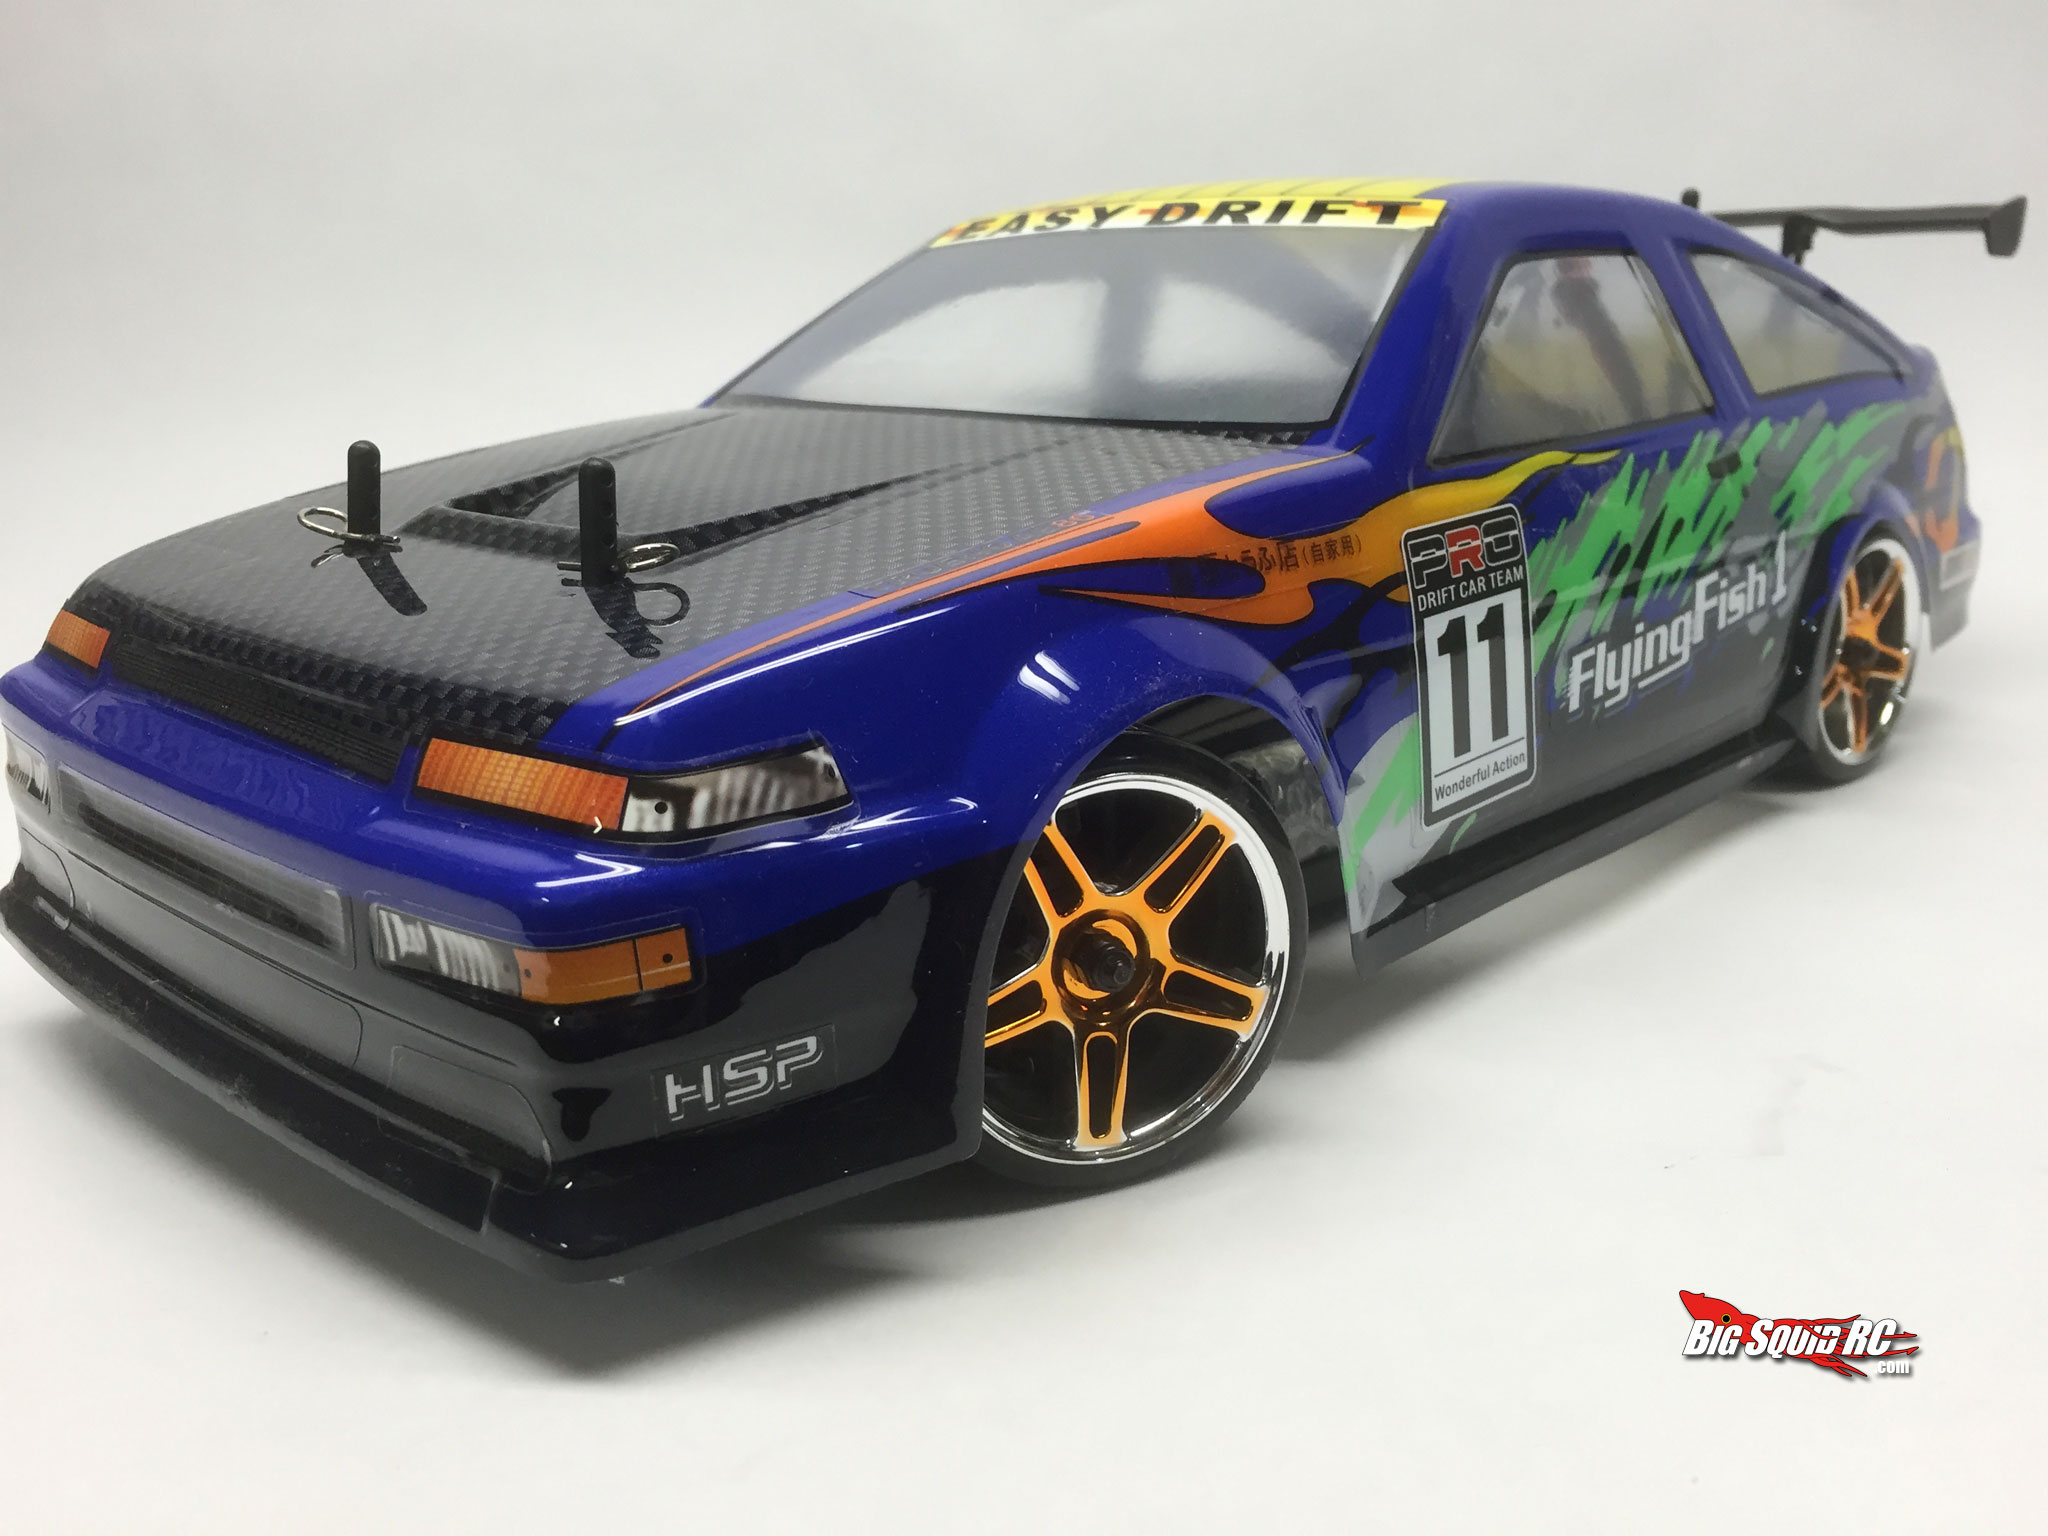 HSP Flying Fish RTR Drift car review « Big Squid RC – RC Car and